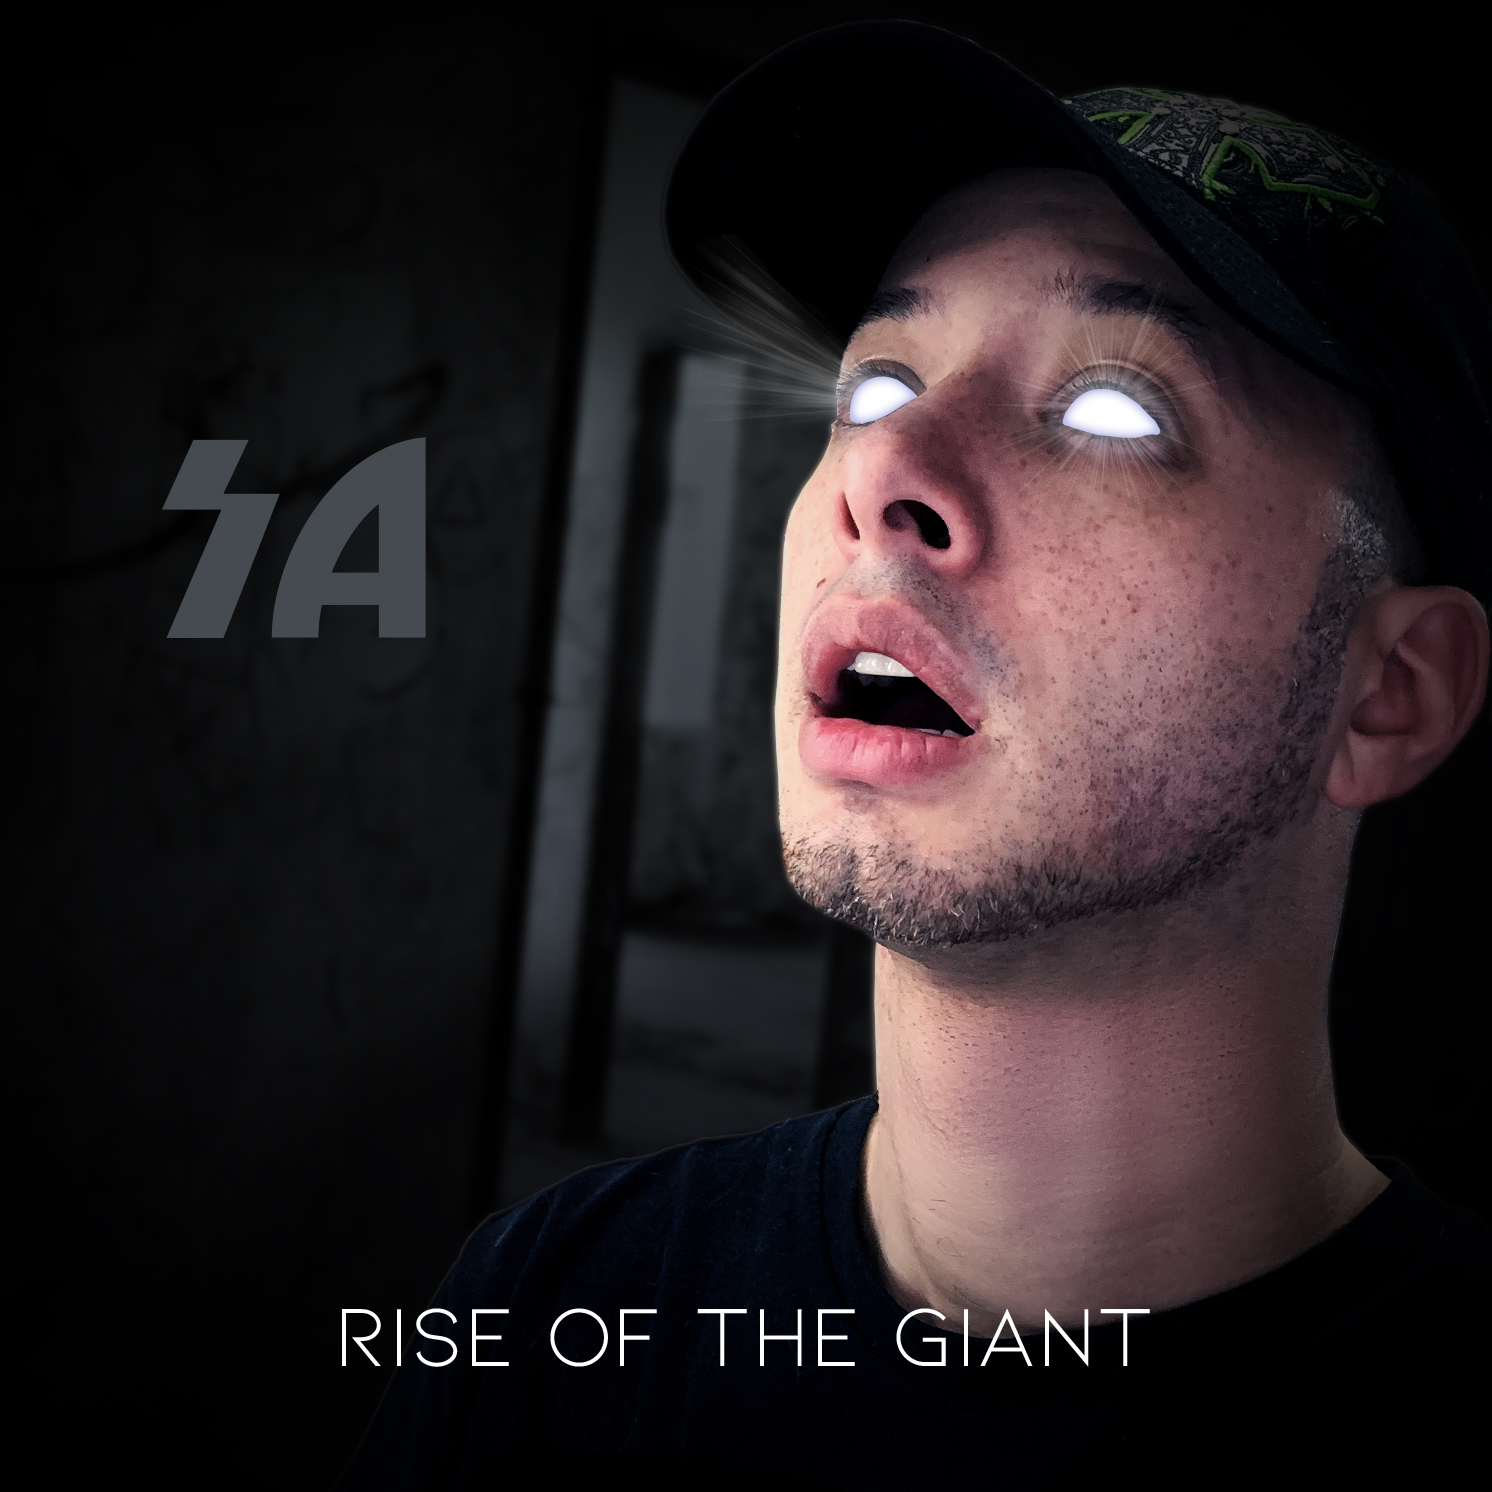 RISE OF THE GIANT